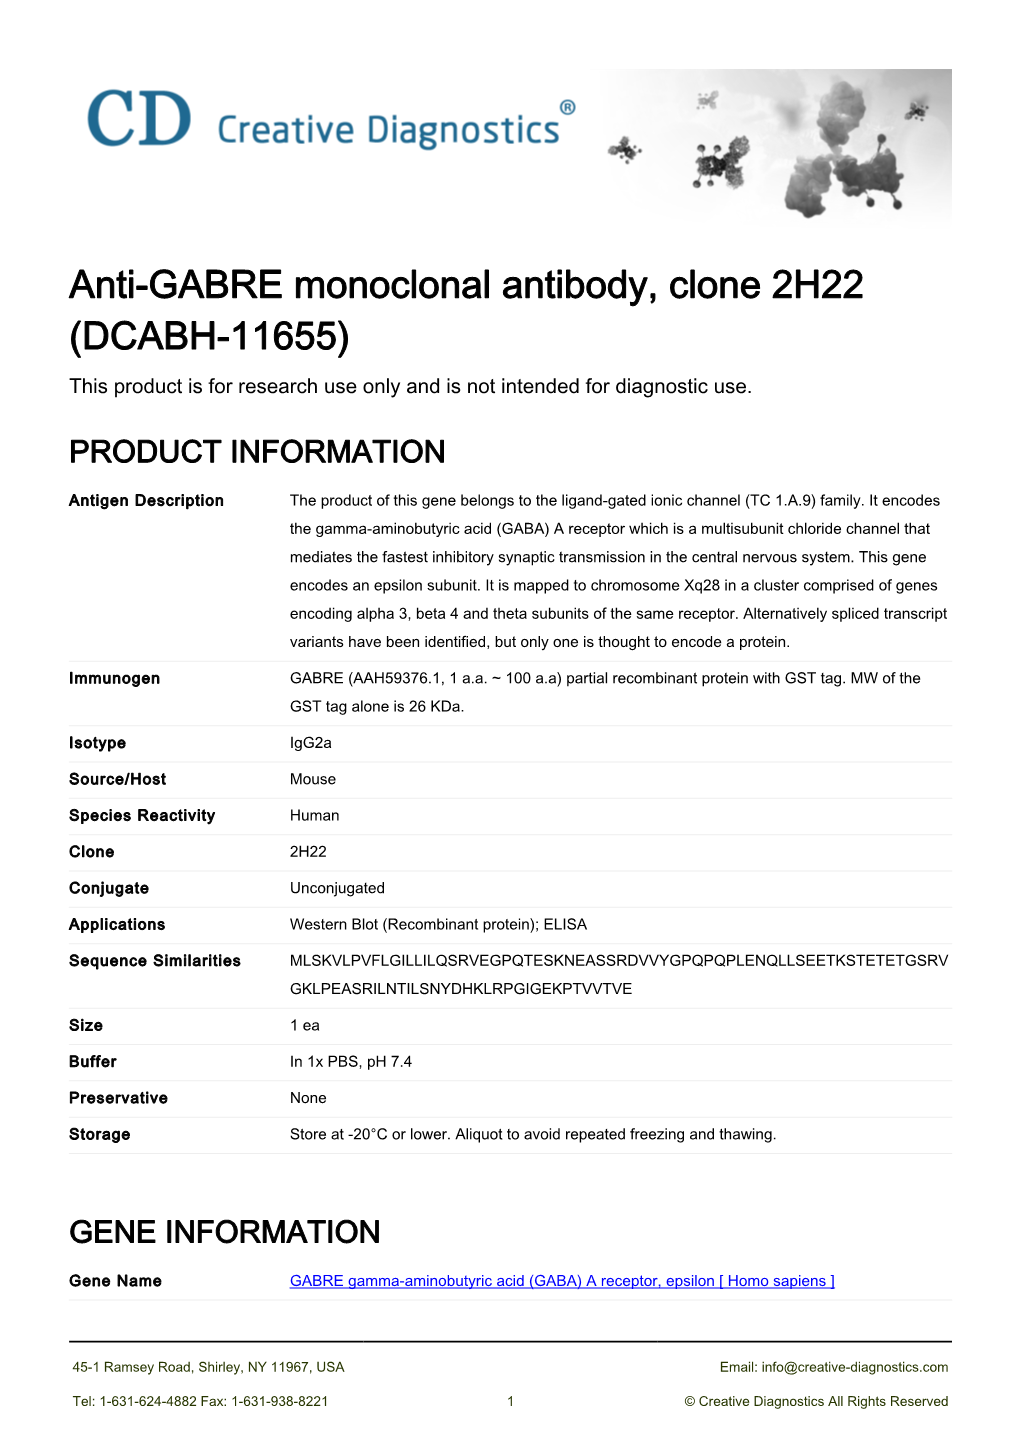 Anti-GABRE Monoclonal Antibody, Clone 2H22 (DCABH-11655) This Product Is for Research Use Only and Is Not Intended for Diagnostic Use